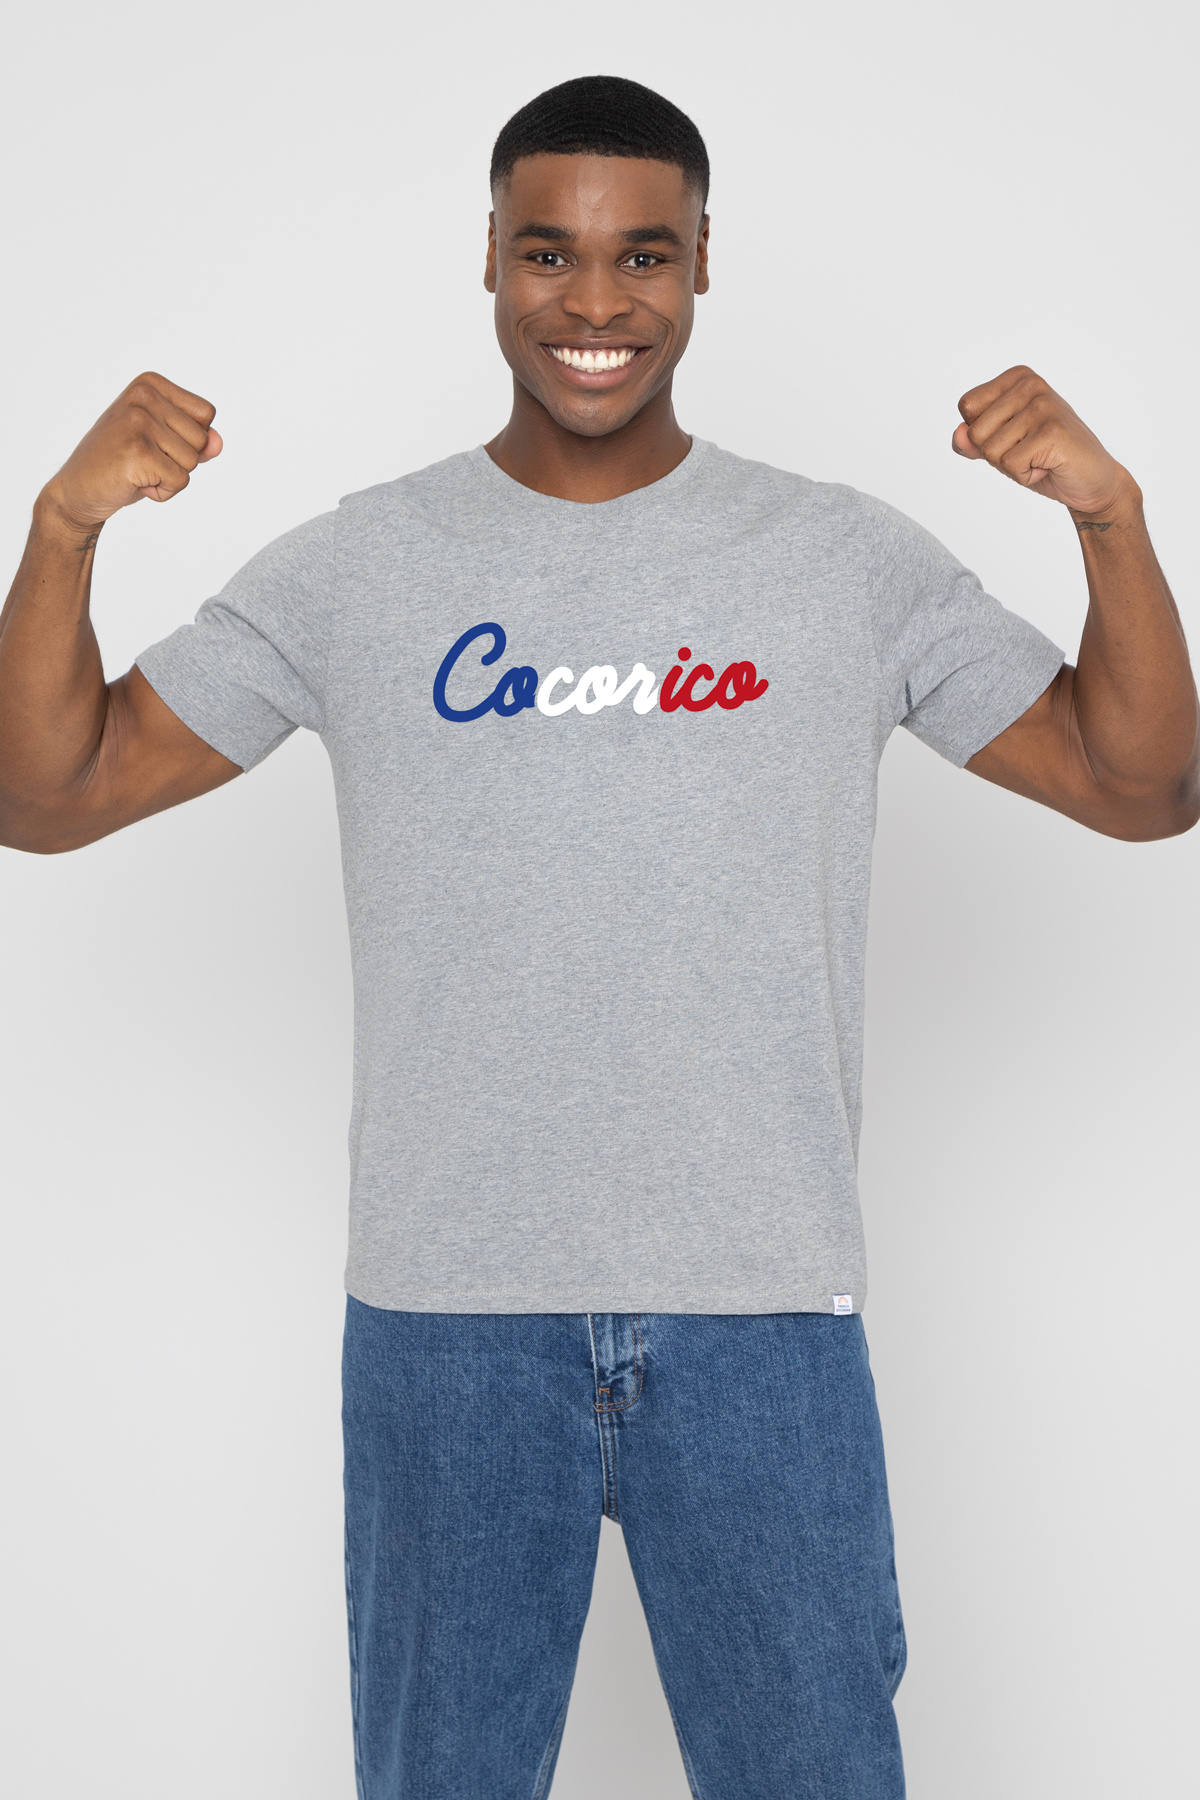 T-shirt poche homme Noir - Made in France - Cocorico